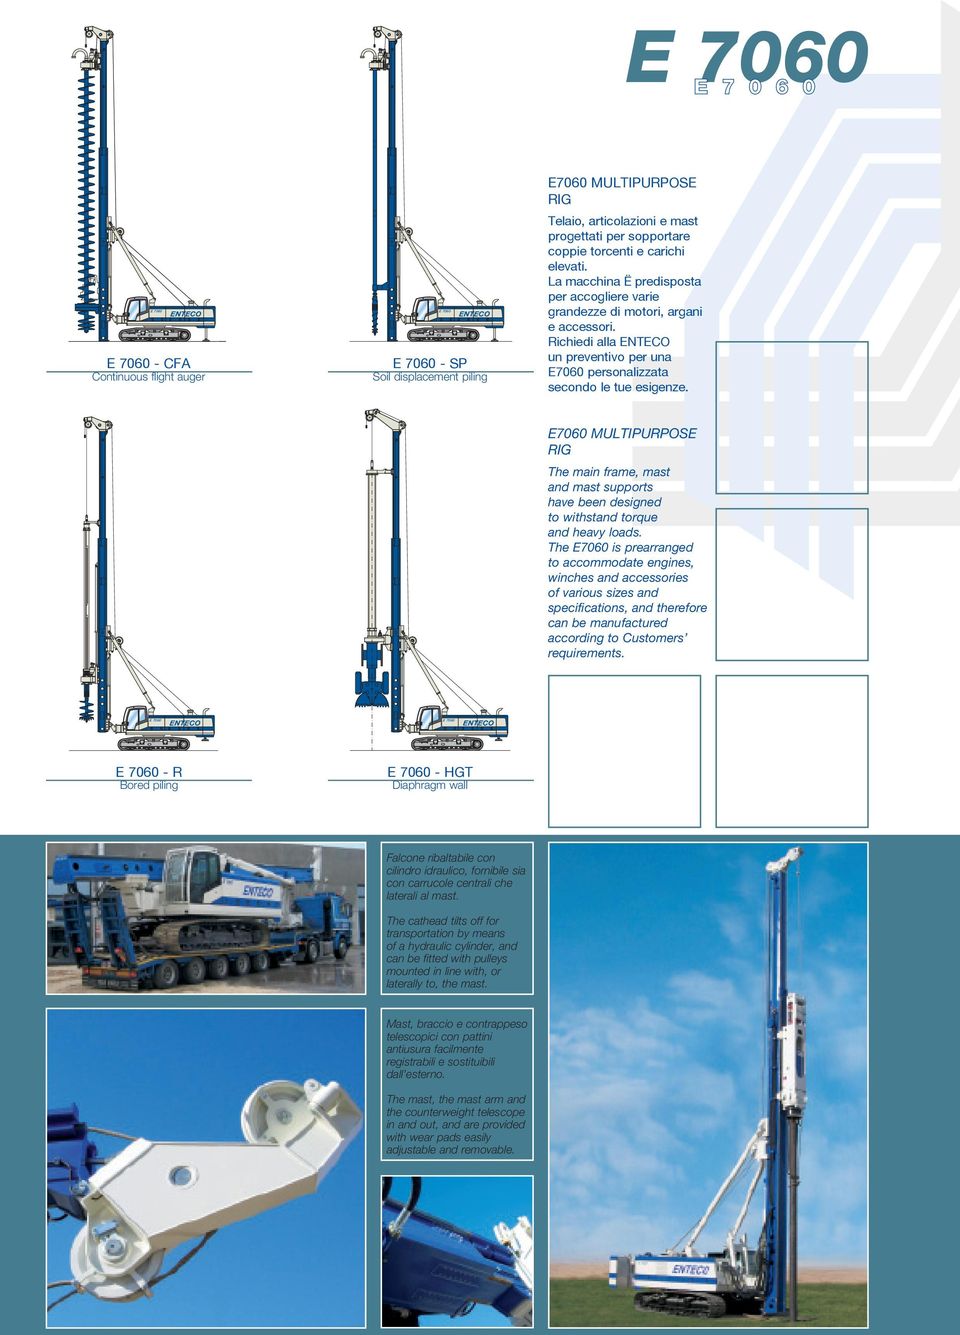 E7060 MULTIPURPOSE RIG The main frame, mast and mast supports have been designed to withstand torque and heavy loads.